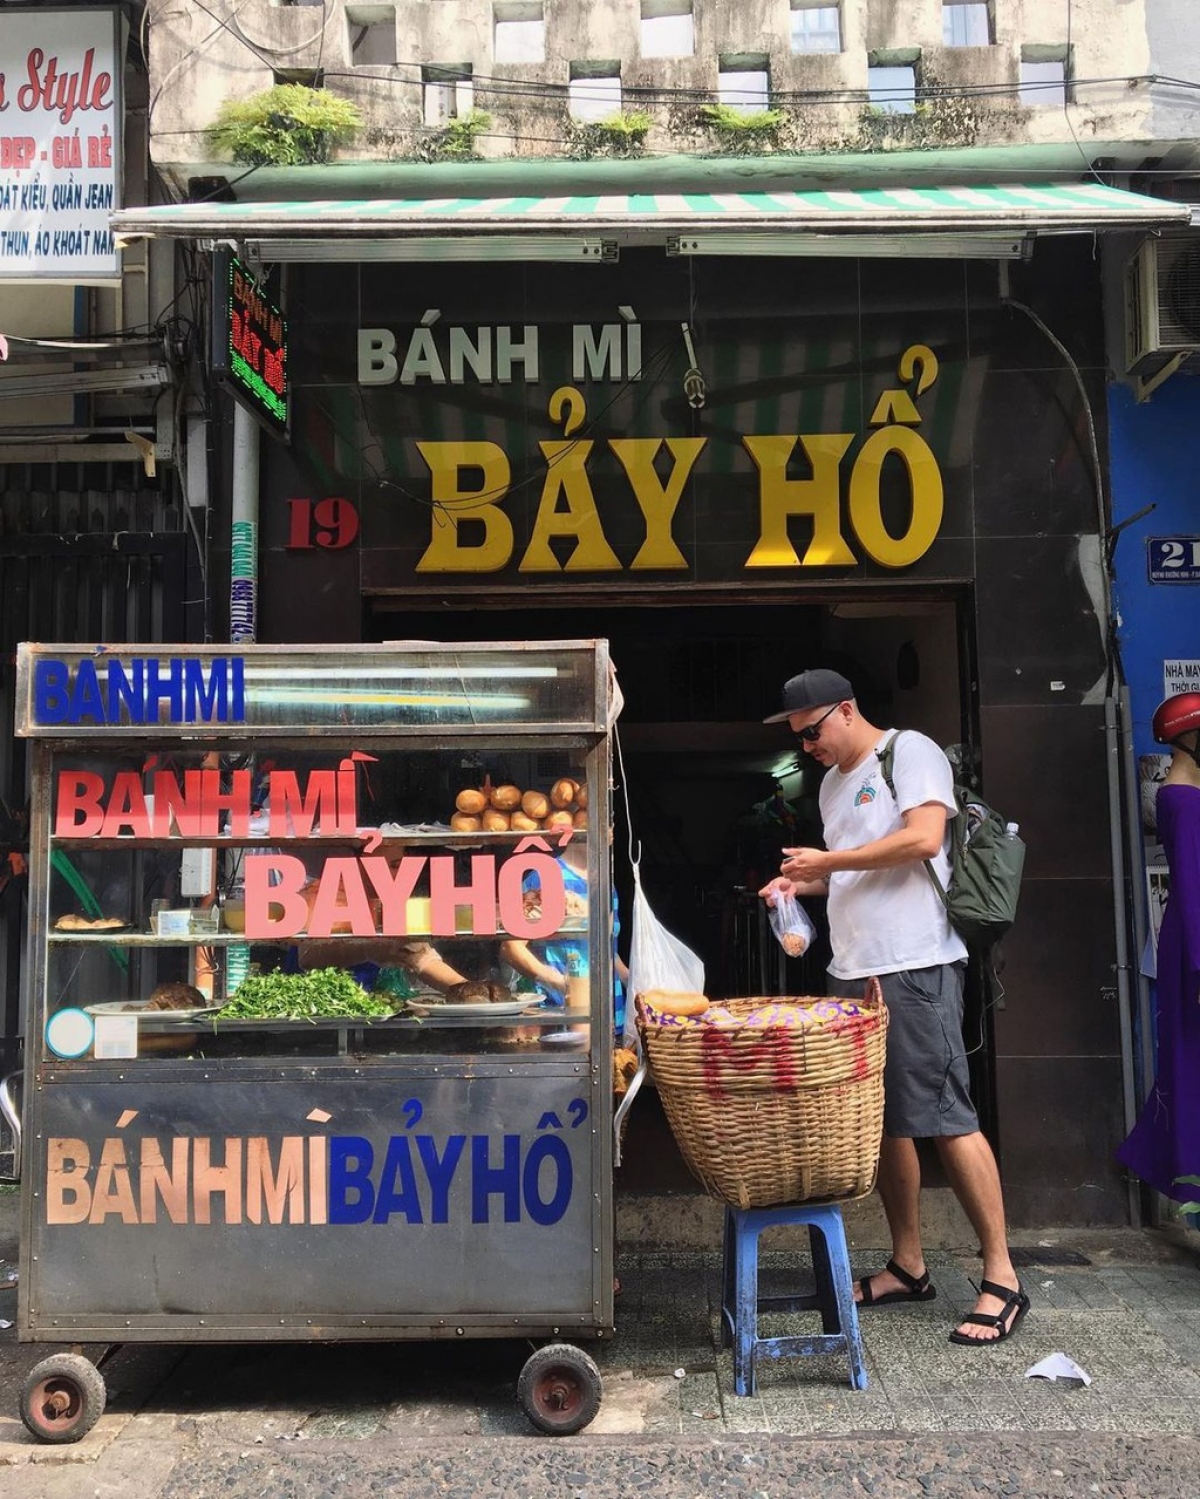 Bay Ho can be found situated on Huynh Khuong Ninh street and has been a favourite place among Saigonese people for more than 90 years. (Photo: Bushaustin)